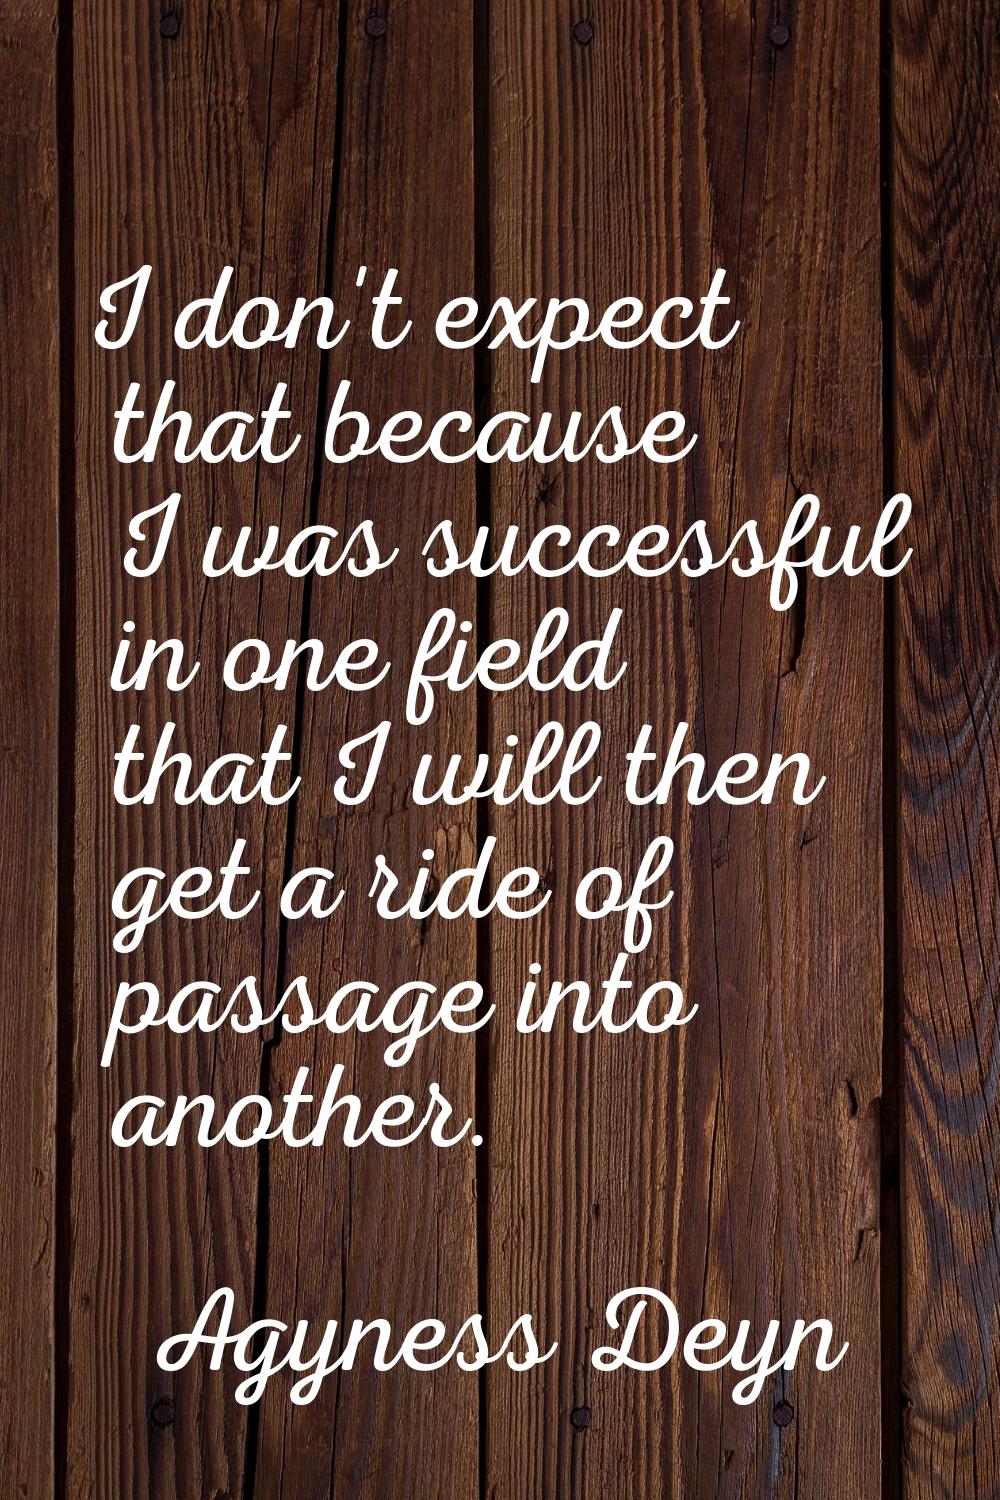 I don't expect that because I was successful in one field that I will then get a ride of passage in